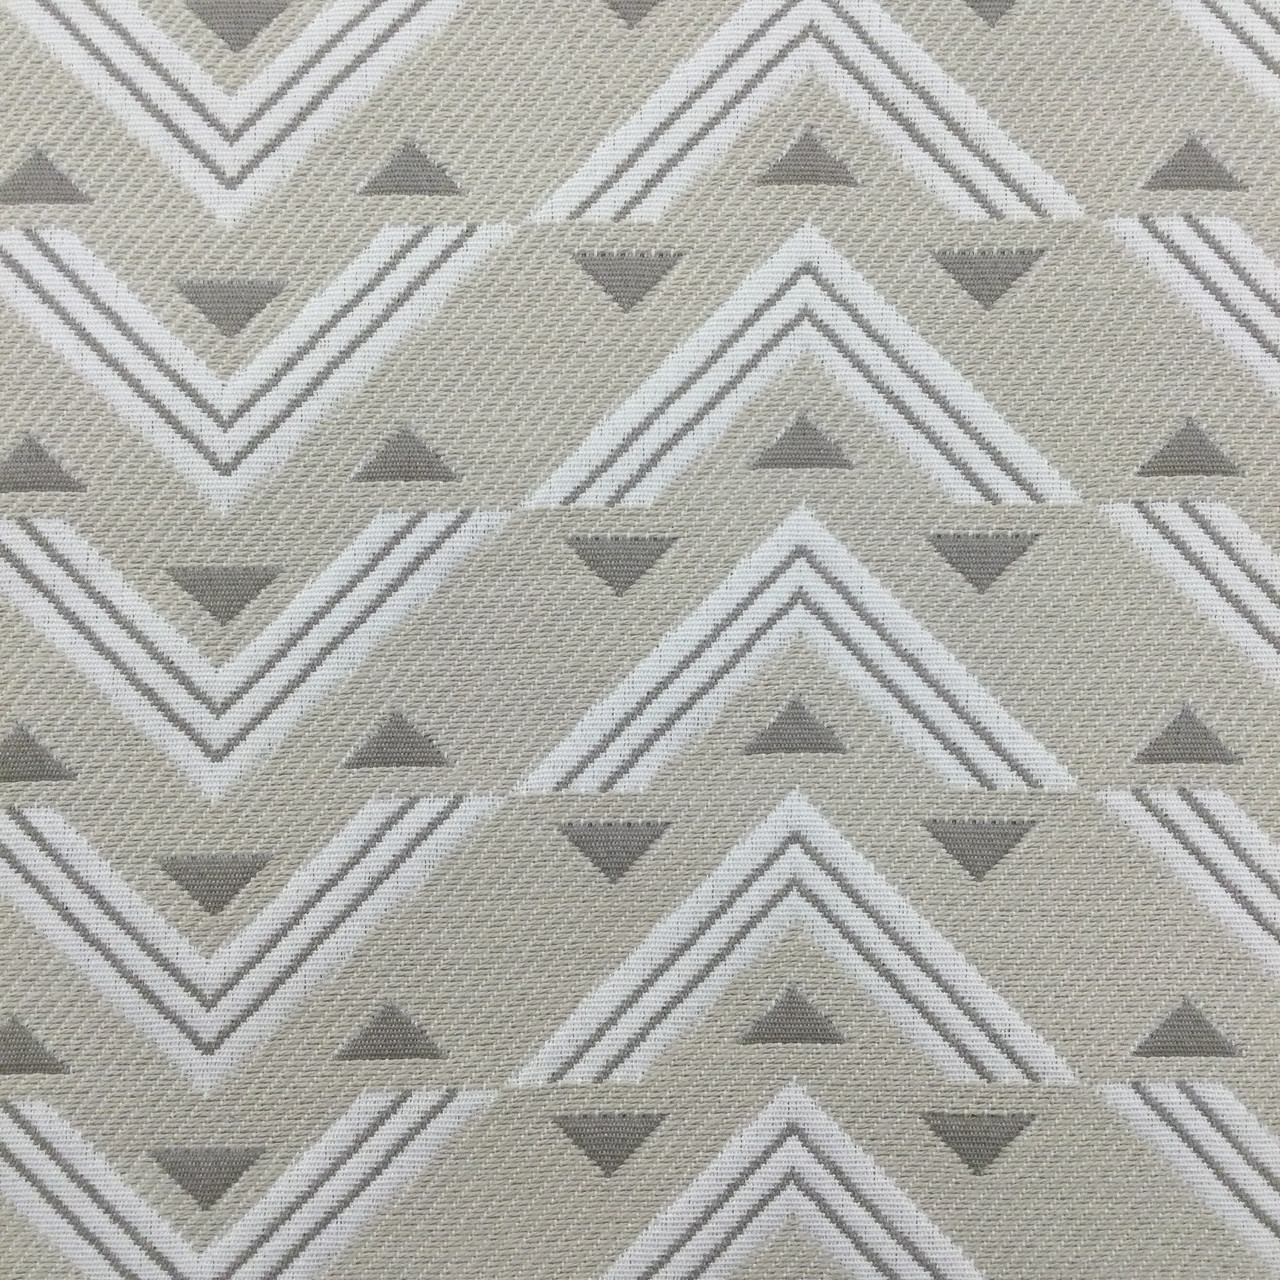 Geometric Triangles in Beige / Grey / White, Home Decor Fabric /  Upholstery, 59% Polyester / 41% Cotton, 54 W, By the Yard